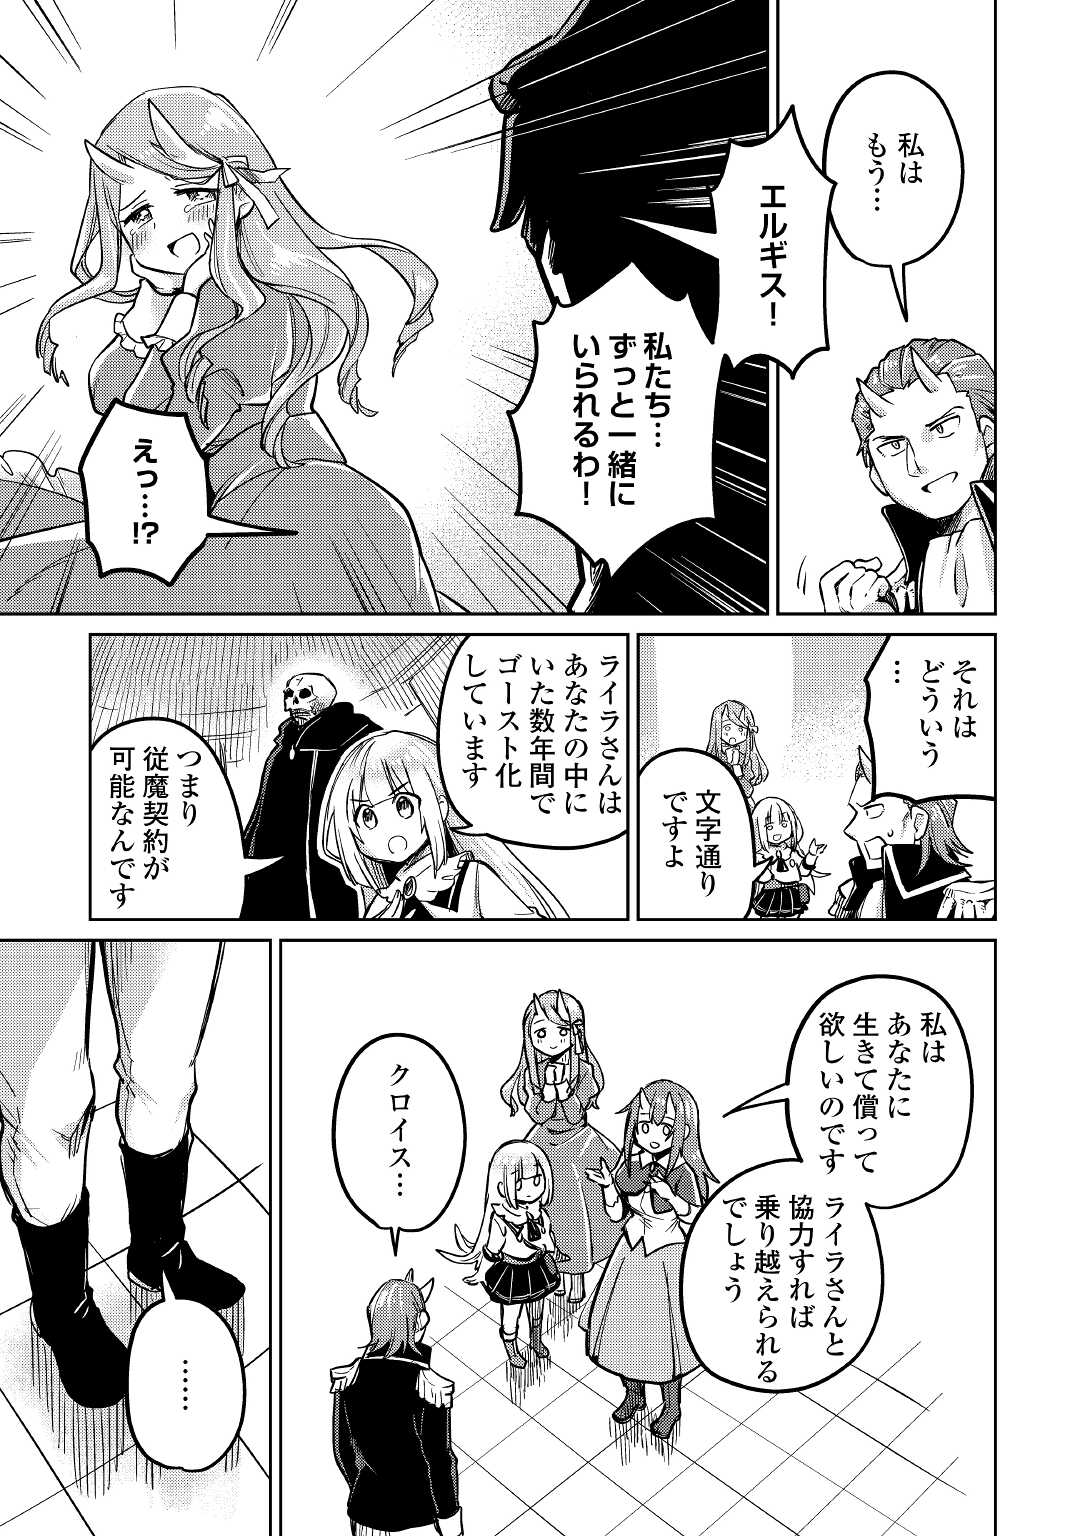 The Former Structural Researcher’s Story of Otherworldly Adventure 第40話 - Page 17